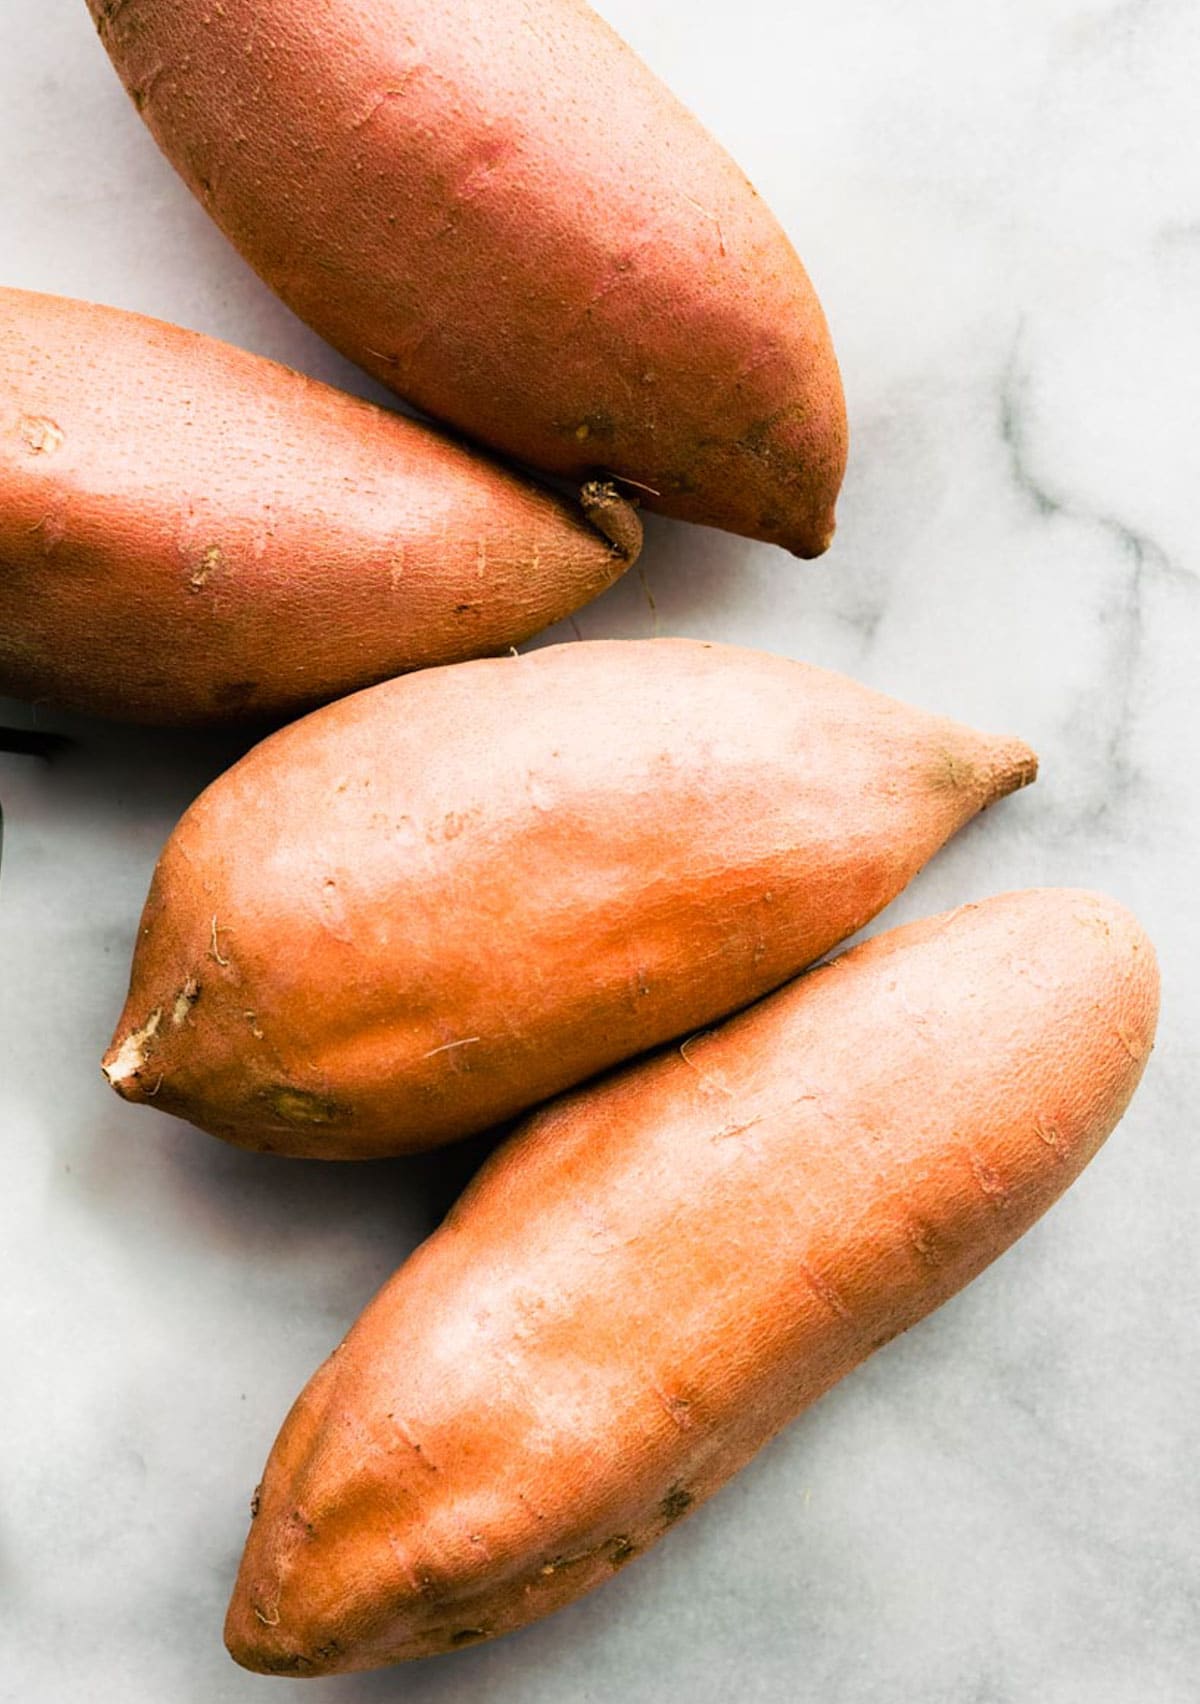 Four sweet potatoes with skin on laying on marble countertop together.